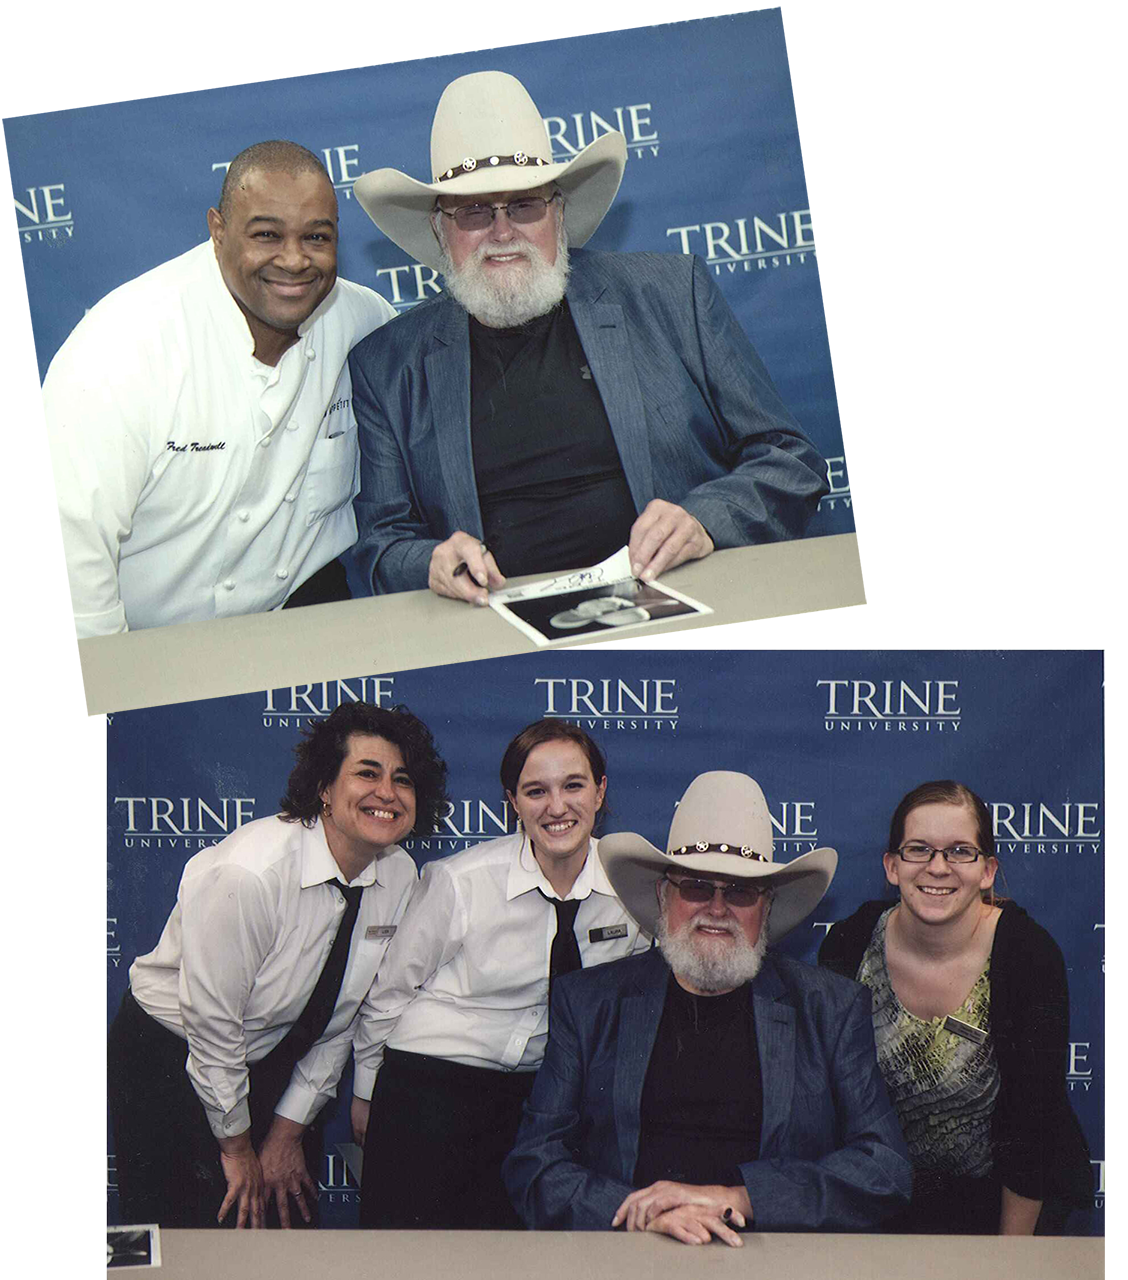 Top: Sous Chef Fred Treadwell with country legend Charlie Daniels Bottom: Catering Attendants Lisa Pardue and Laura Lepley, country legend Charlie Daniels, and Catering Manager Danielle Beer